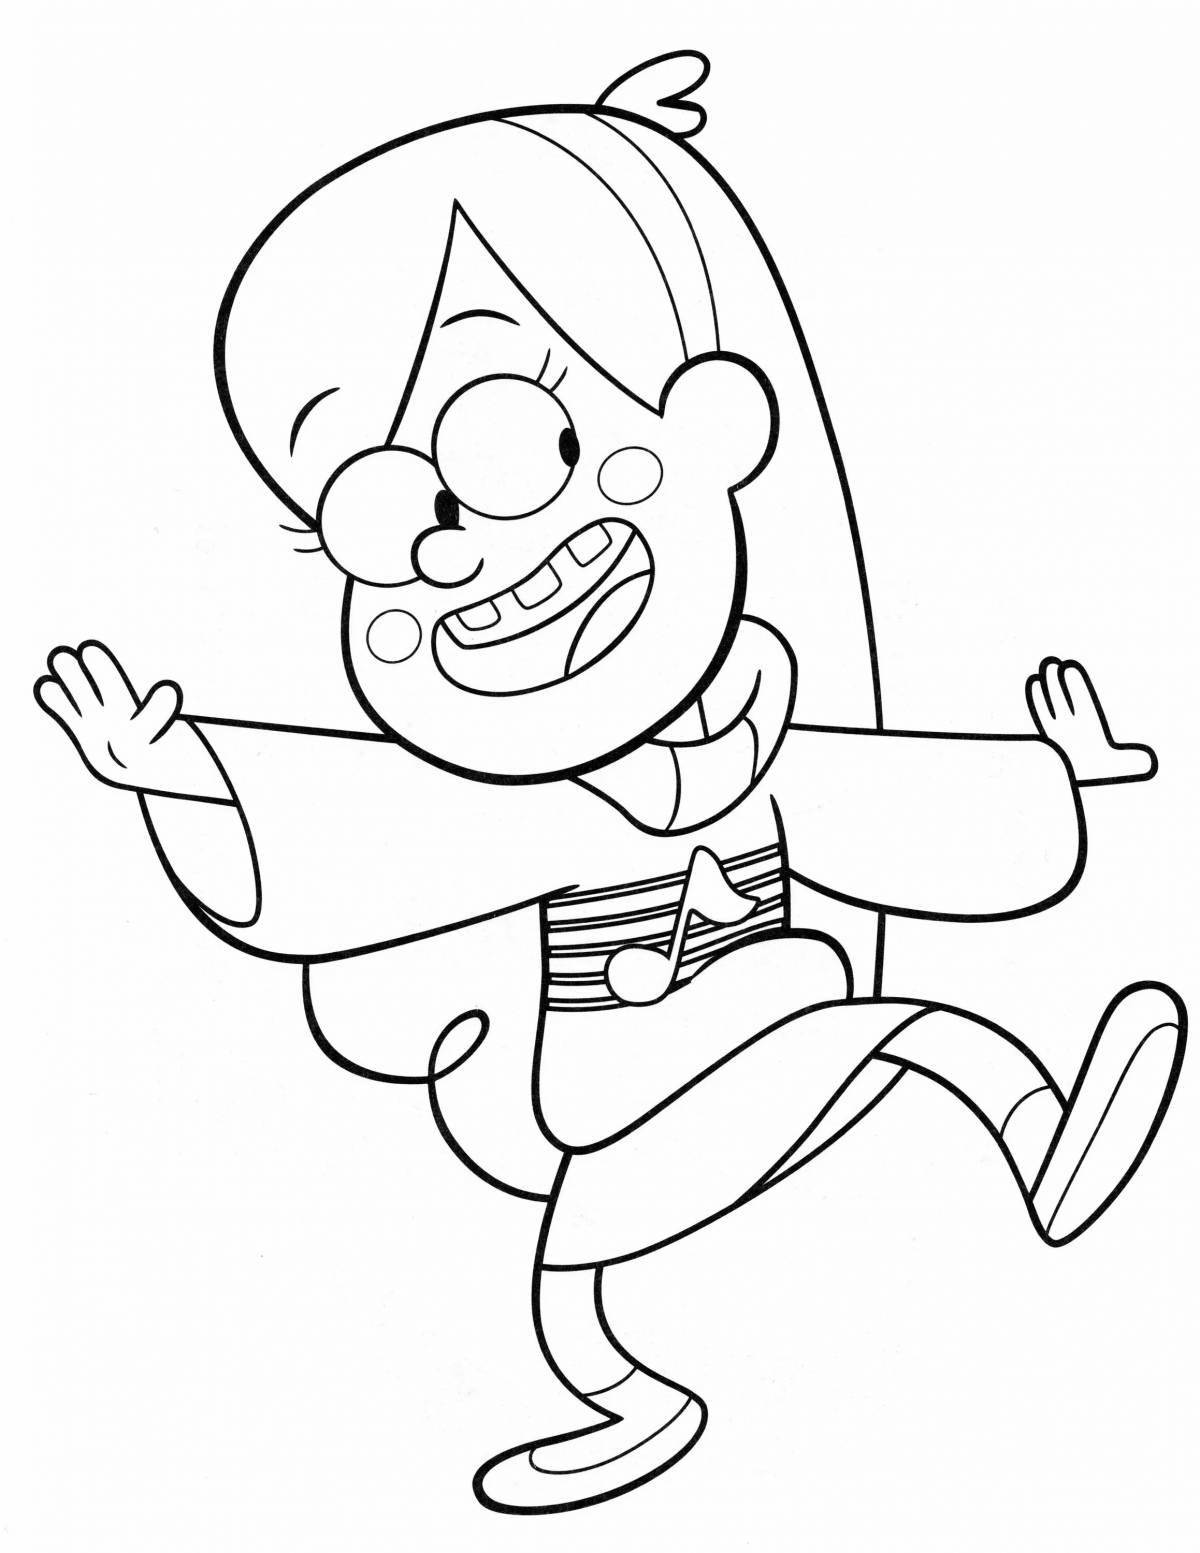 Mabel and chubby funny coloring book